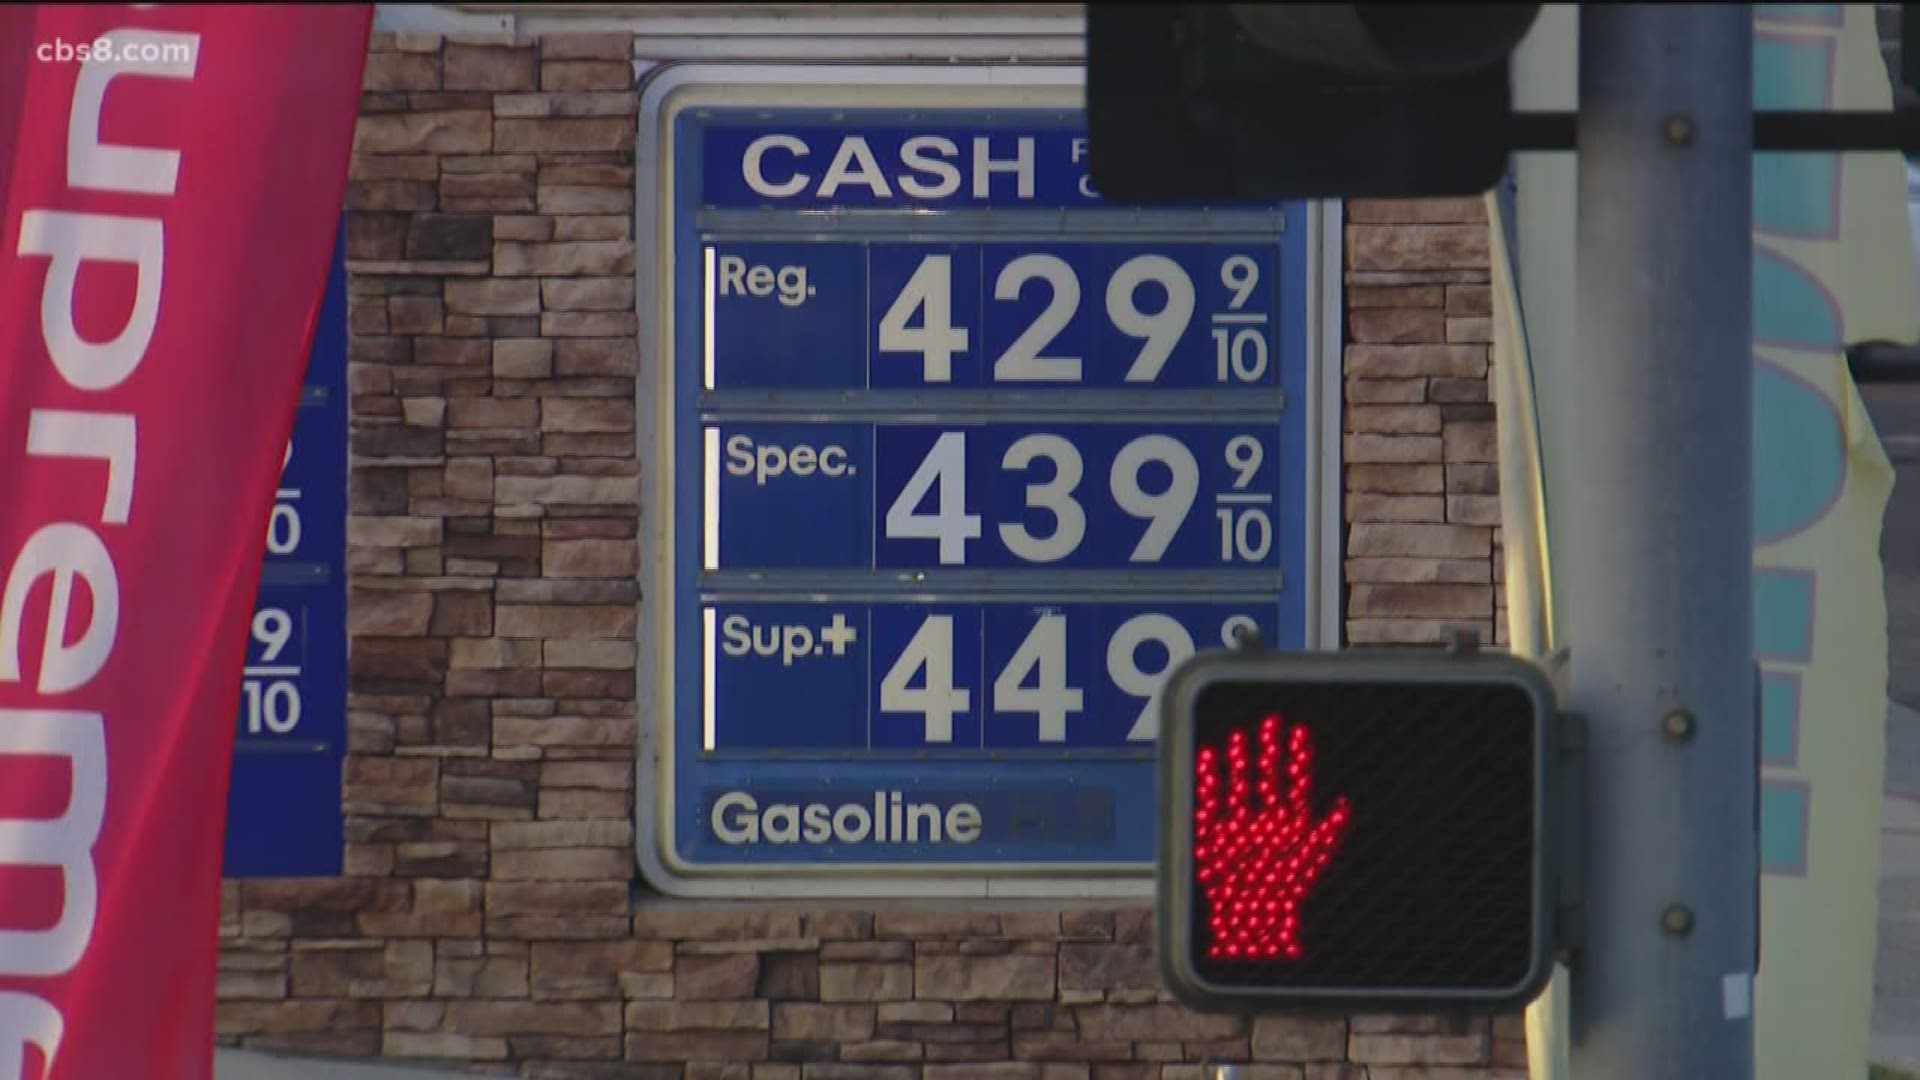 Pain at the pump - these are the highest gas prices we've seen in four years.